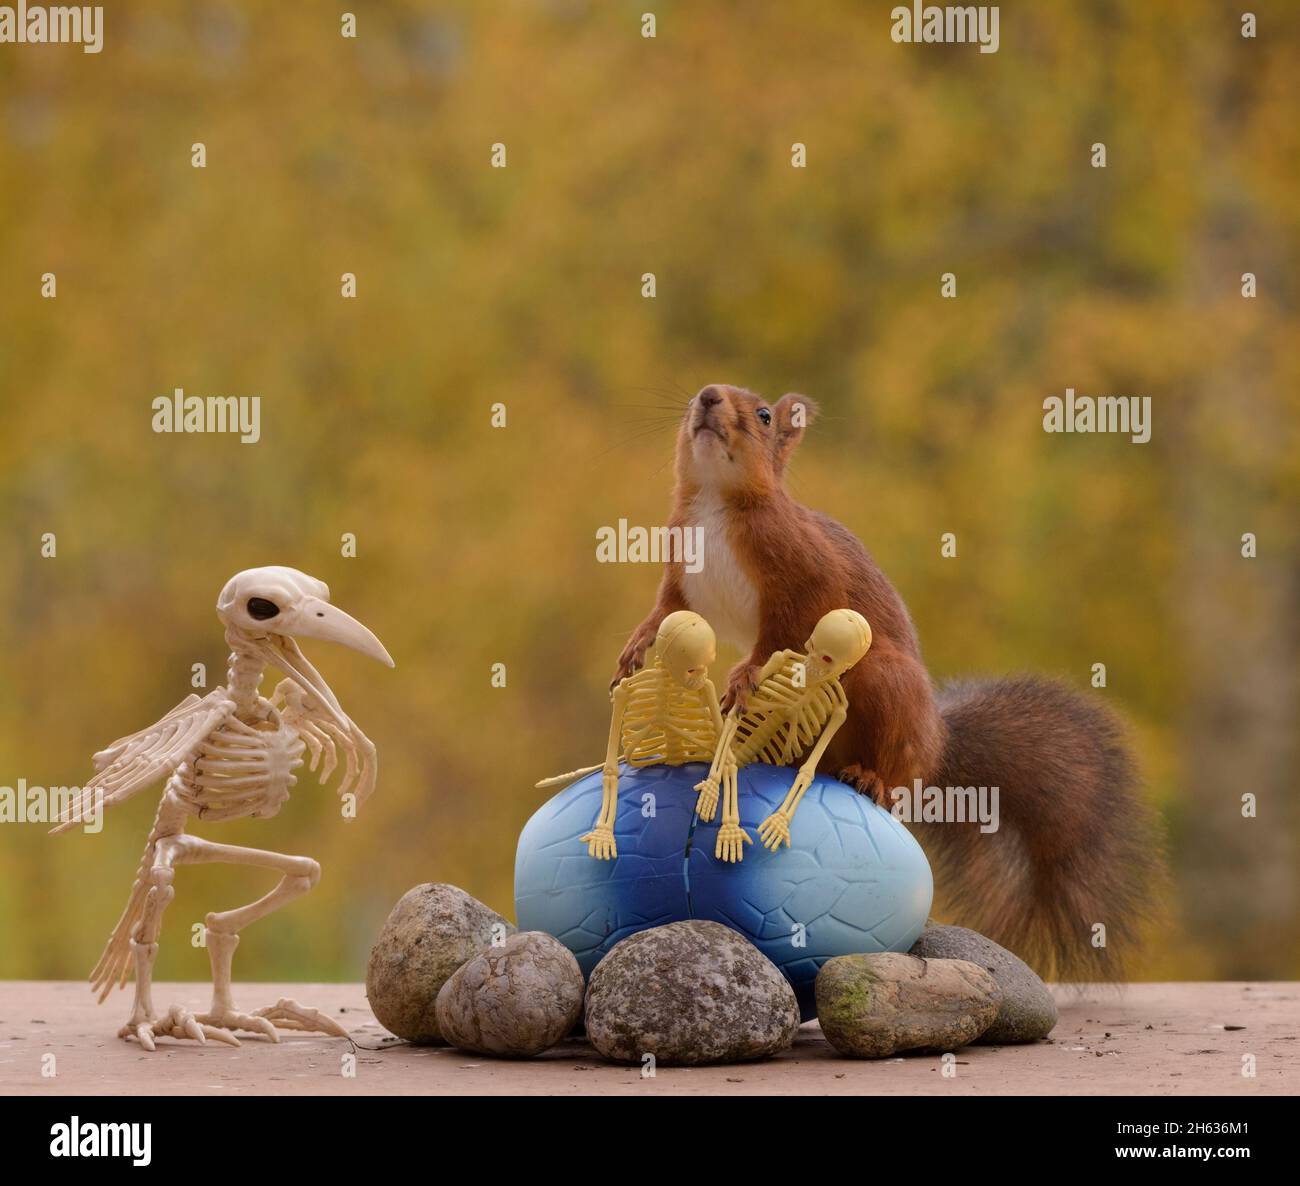 red squirrel is holding skeletons on egg with skeleton bird watching Stock Photo